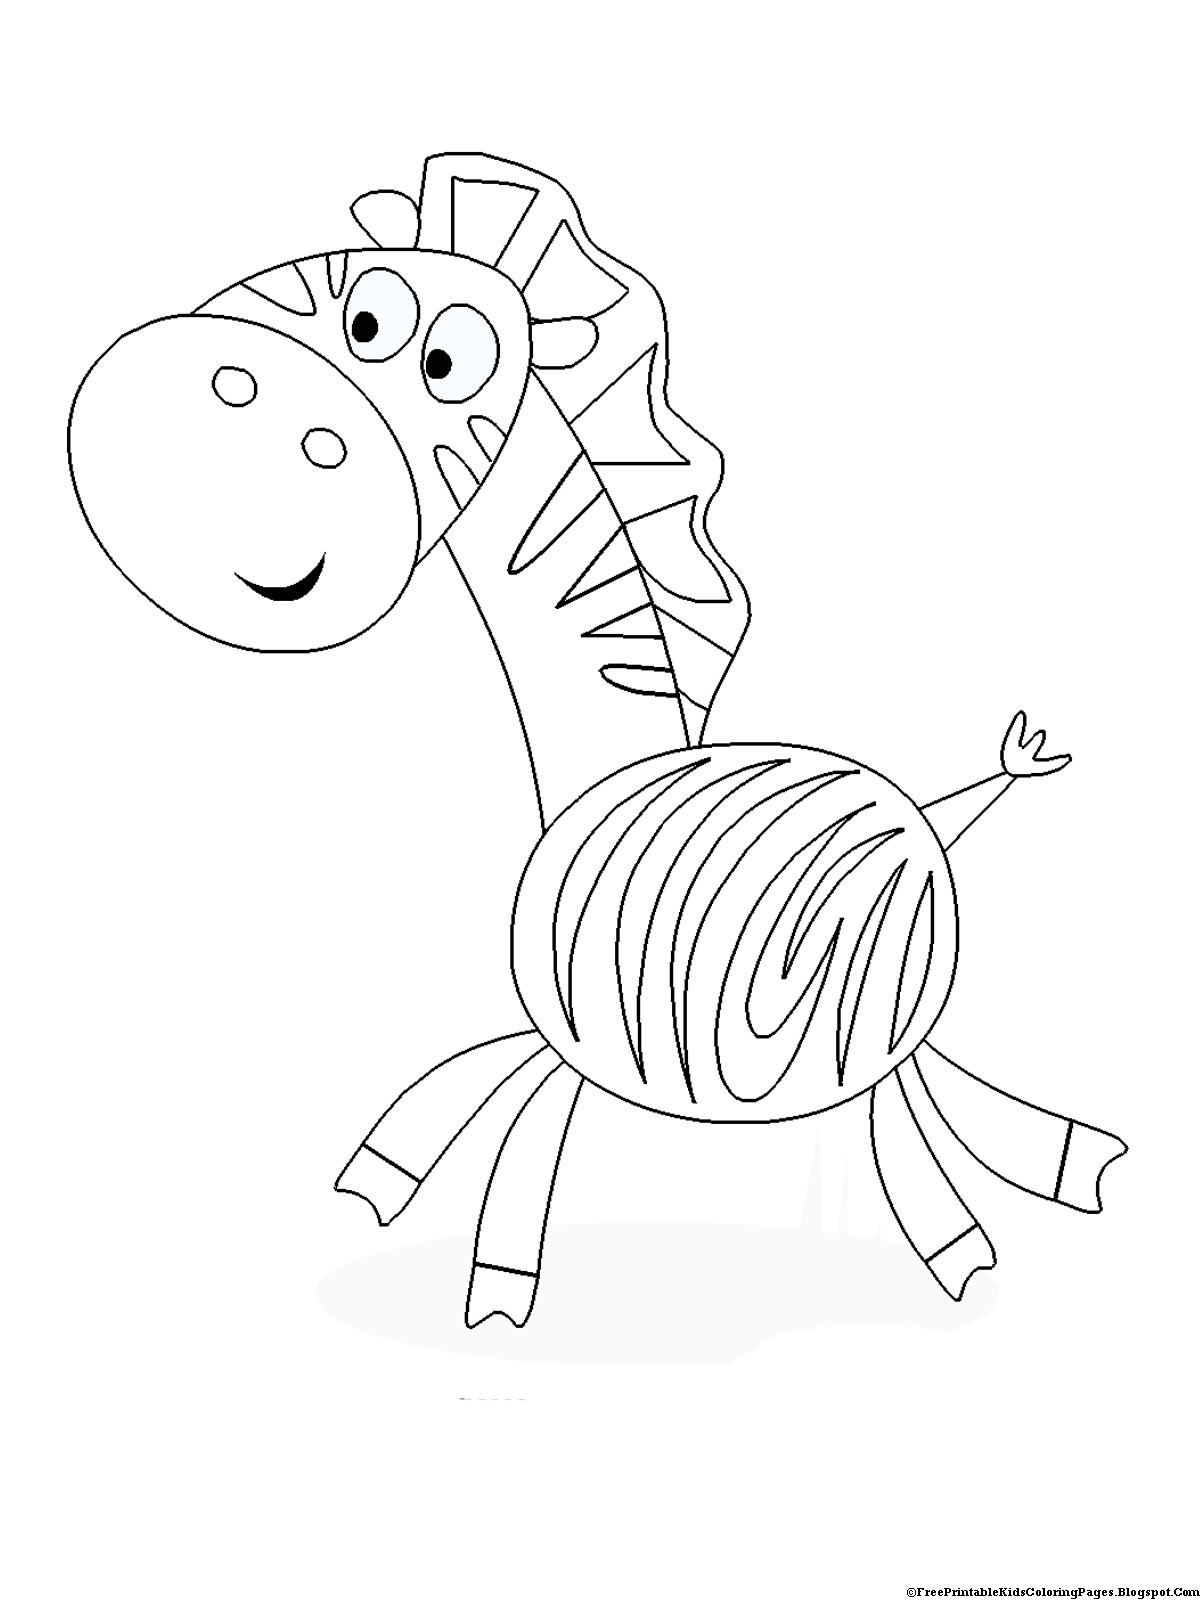 Print Coloring Pages
 Zebra Coloring Pages Free Printable Kids Coloring Pages